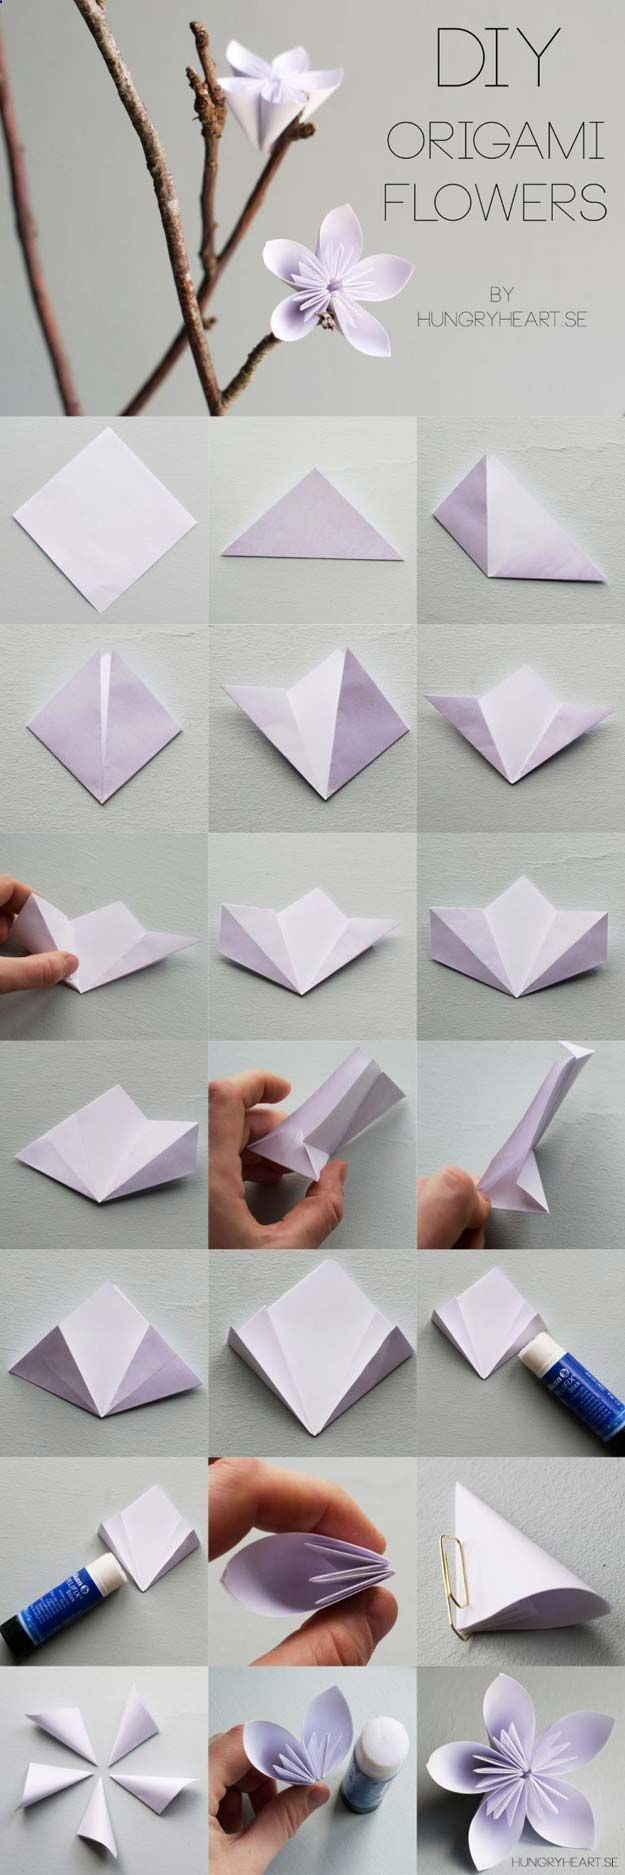 How To Make A Flower Origami Easy Best Origami Tutorials Flower Origami Easy Diy Origami Tutorial